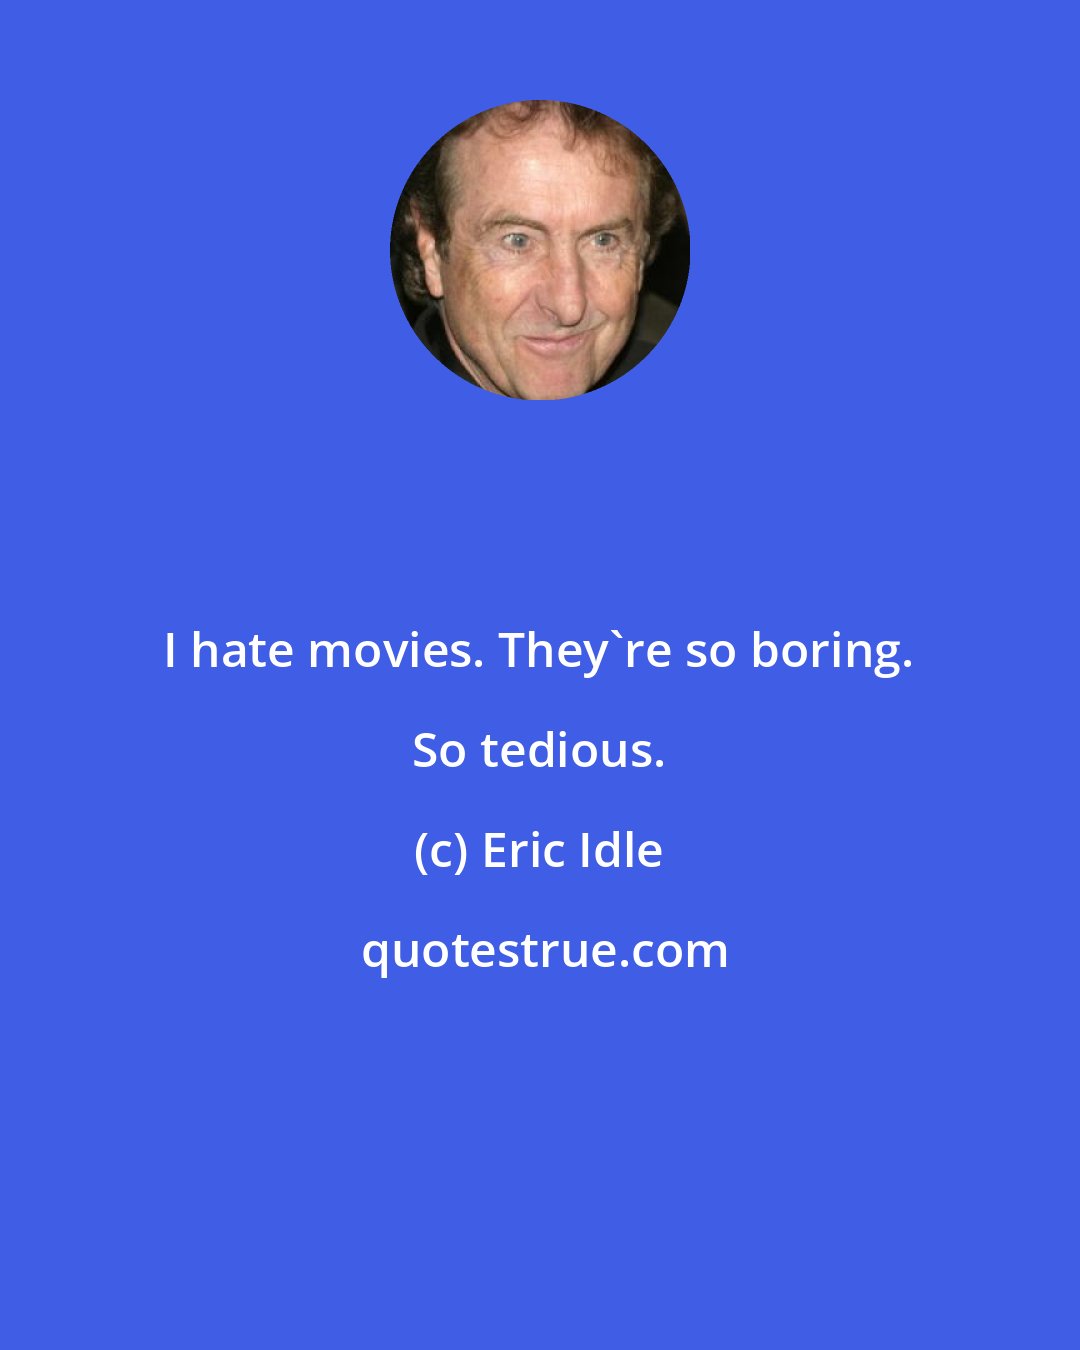 Eric Idle: I hate movies. They're so boring. So tedious.